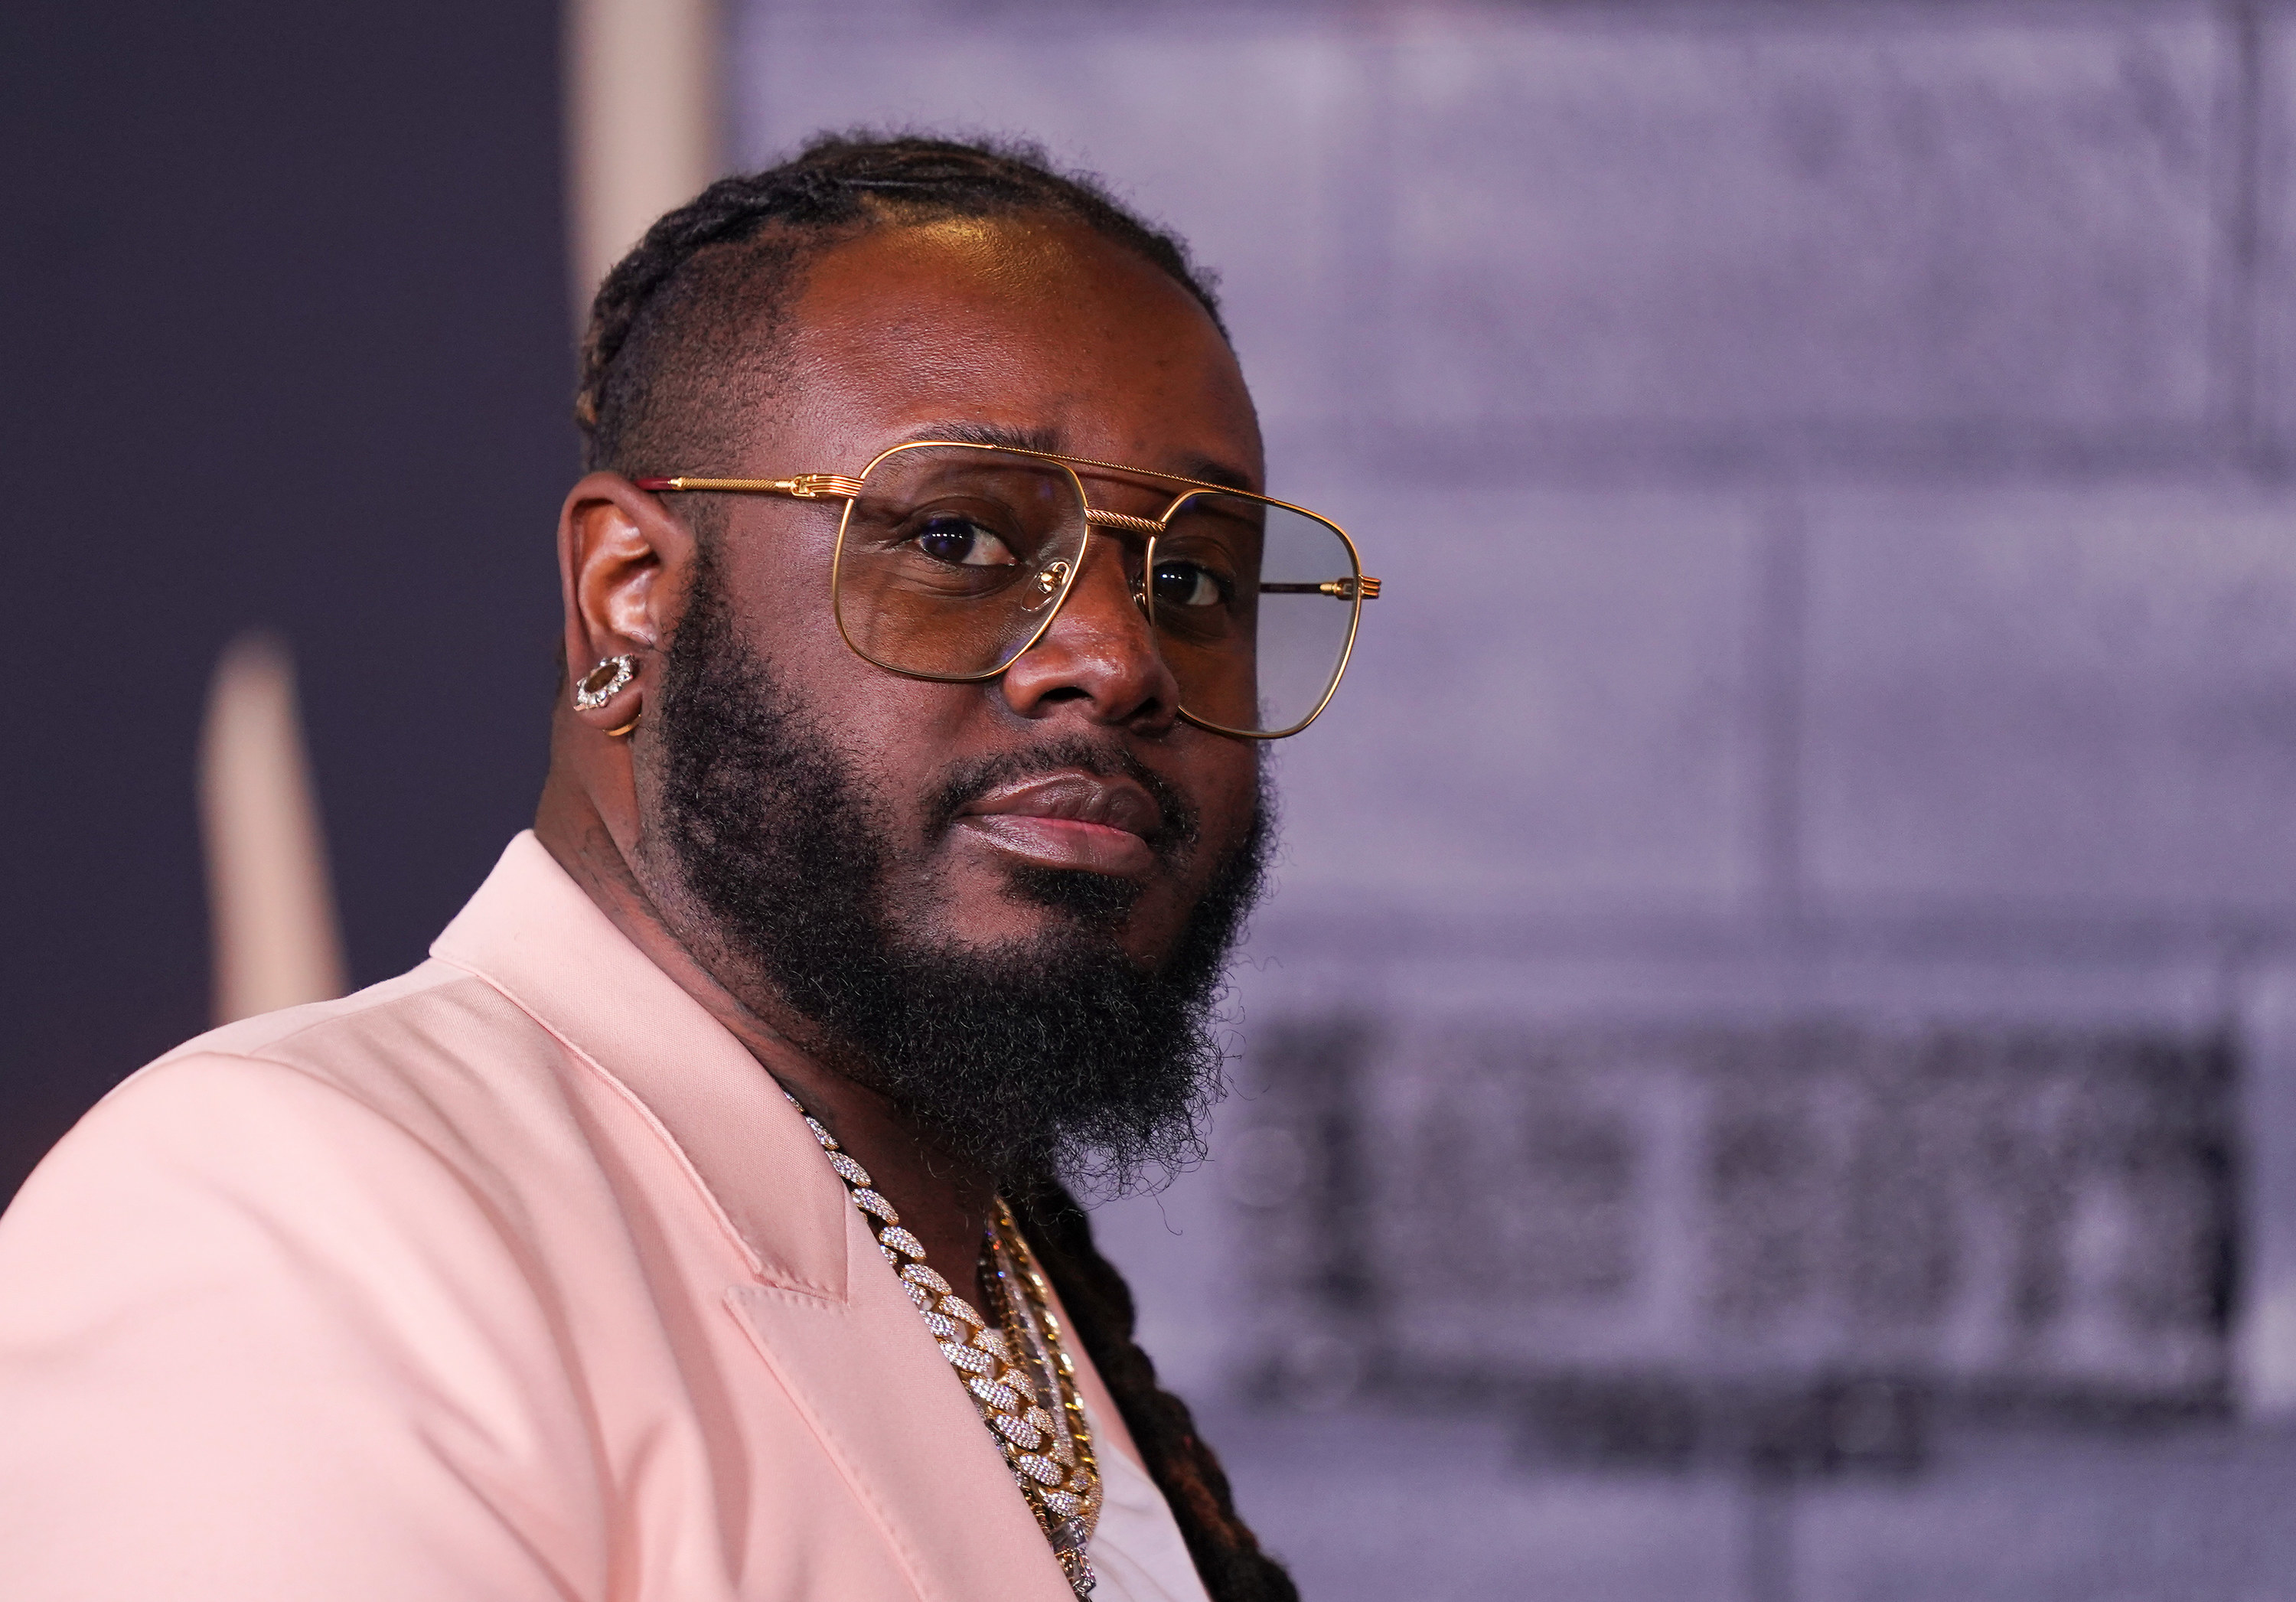 T-pain looks unsure while looking at the camera